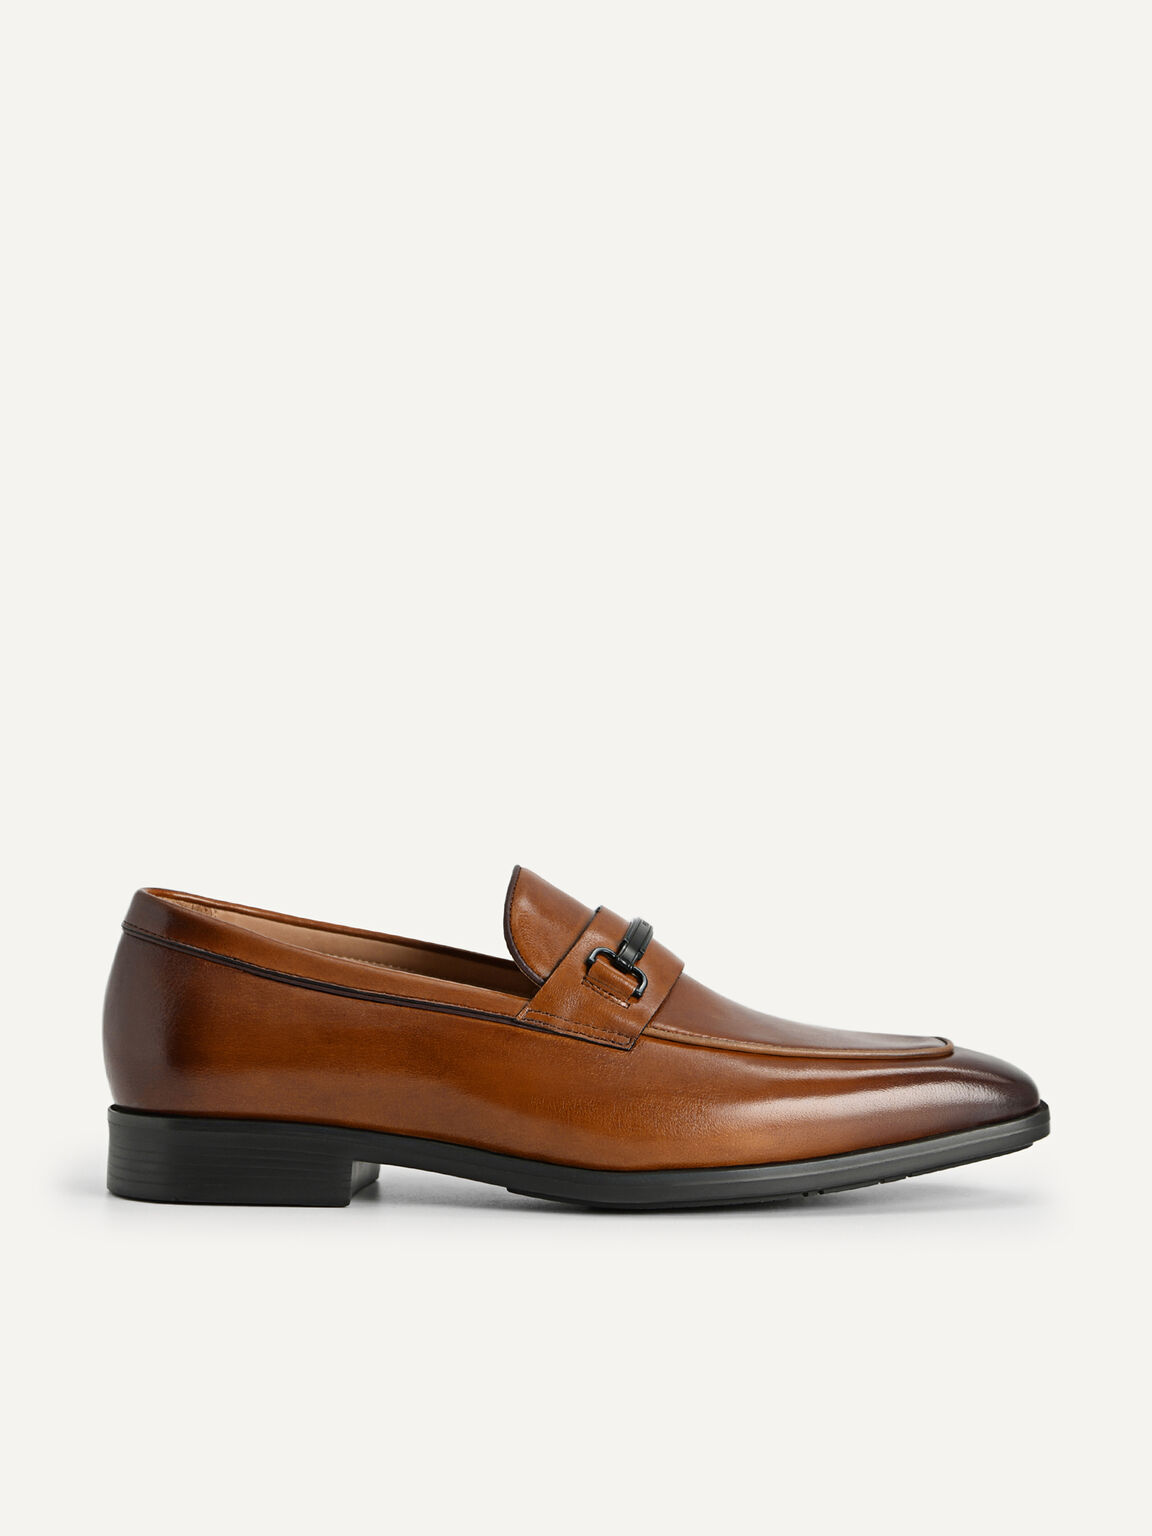 Altitude Leather Loafers, Camel